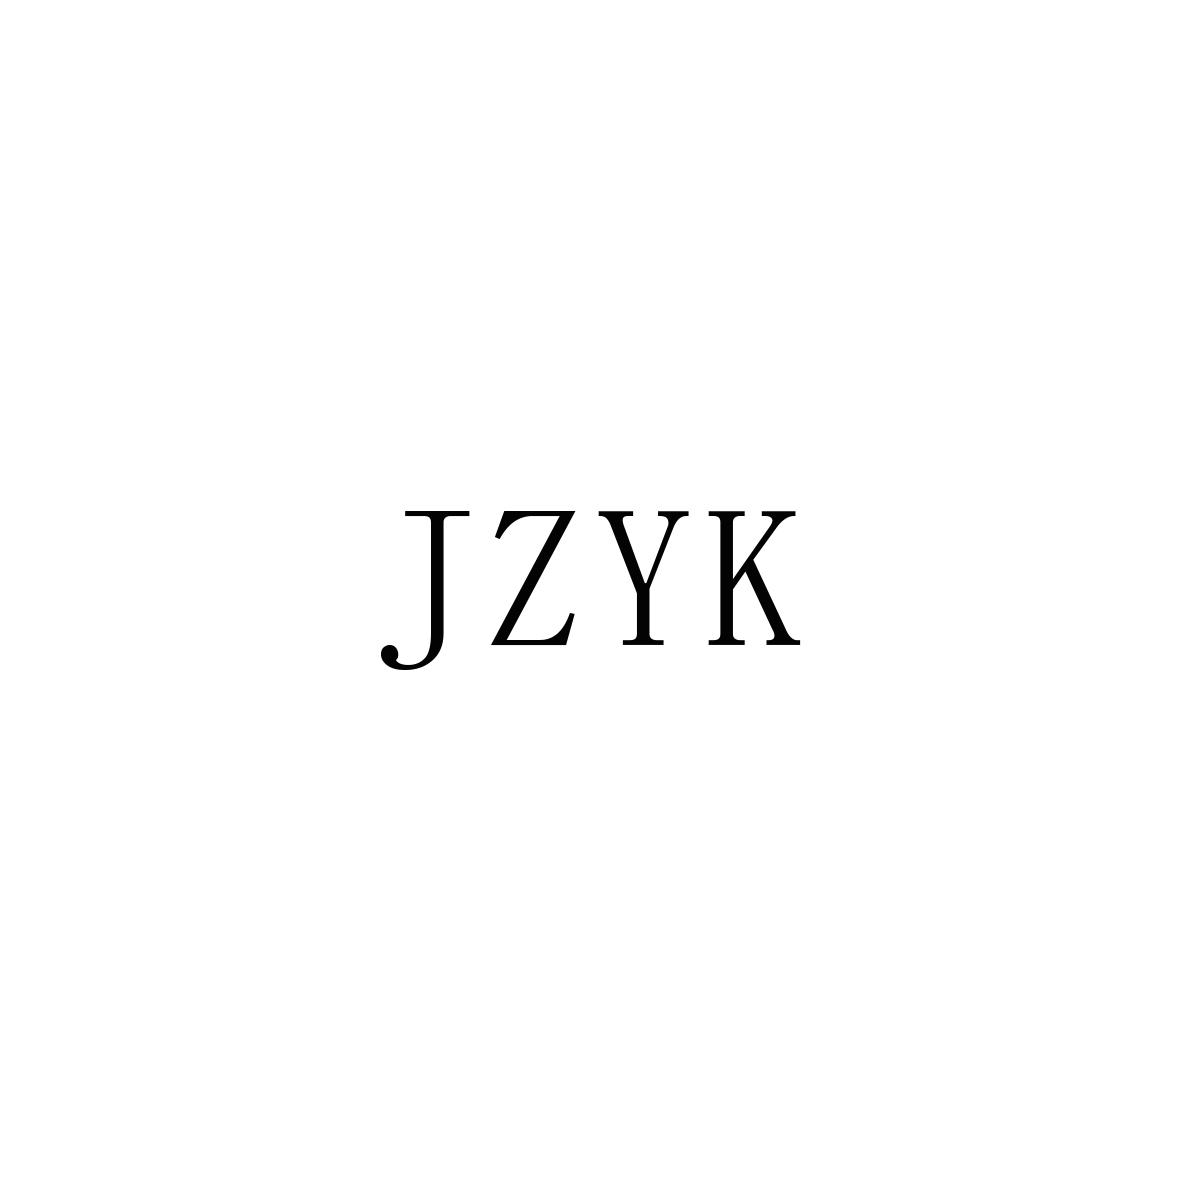 JZYK